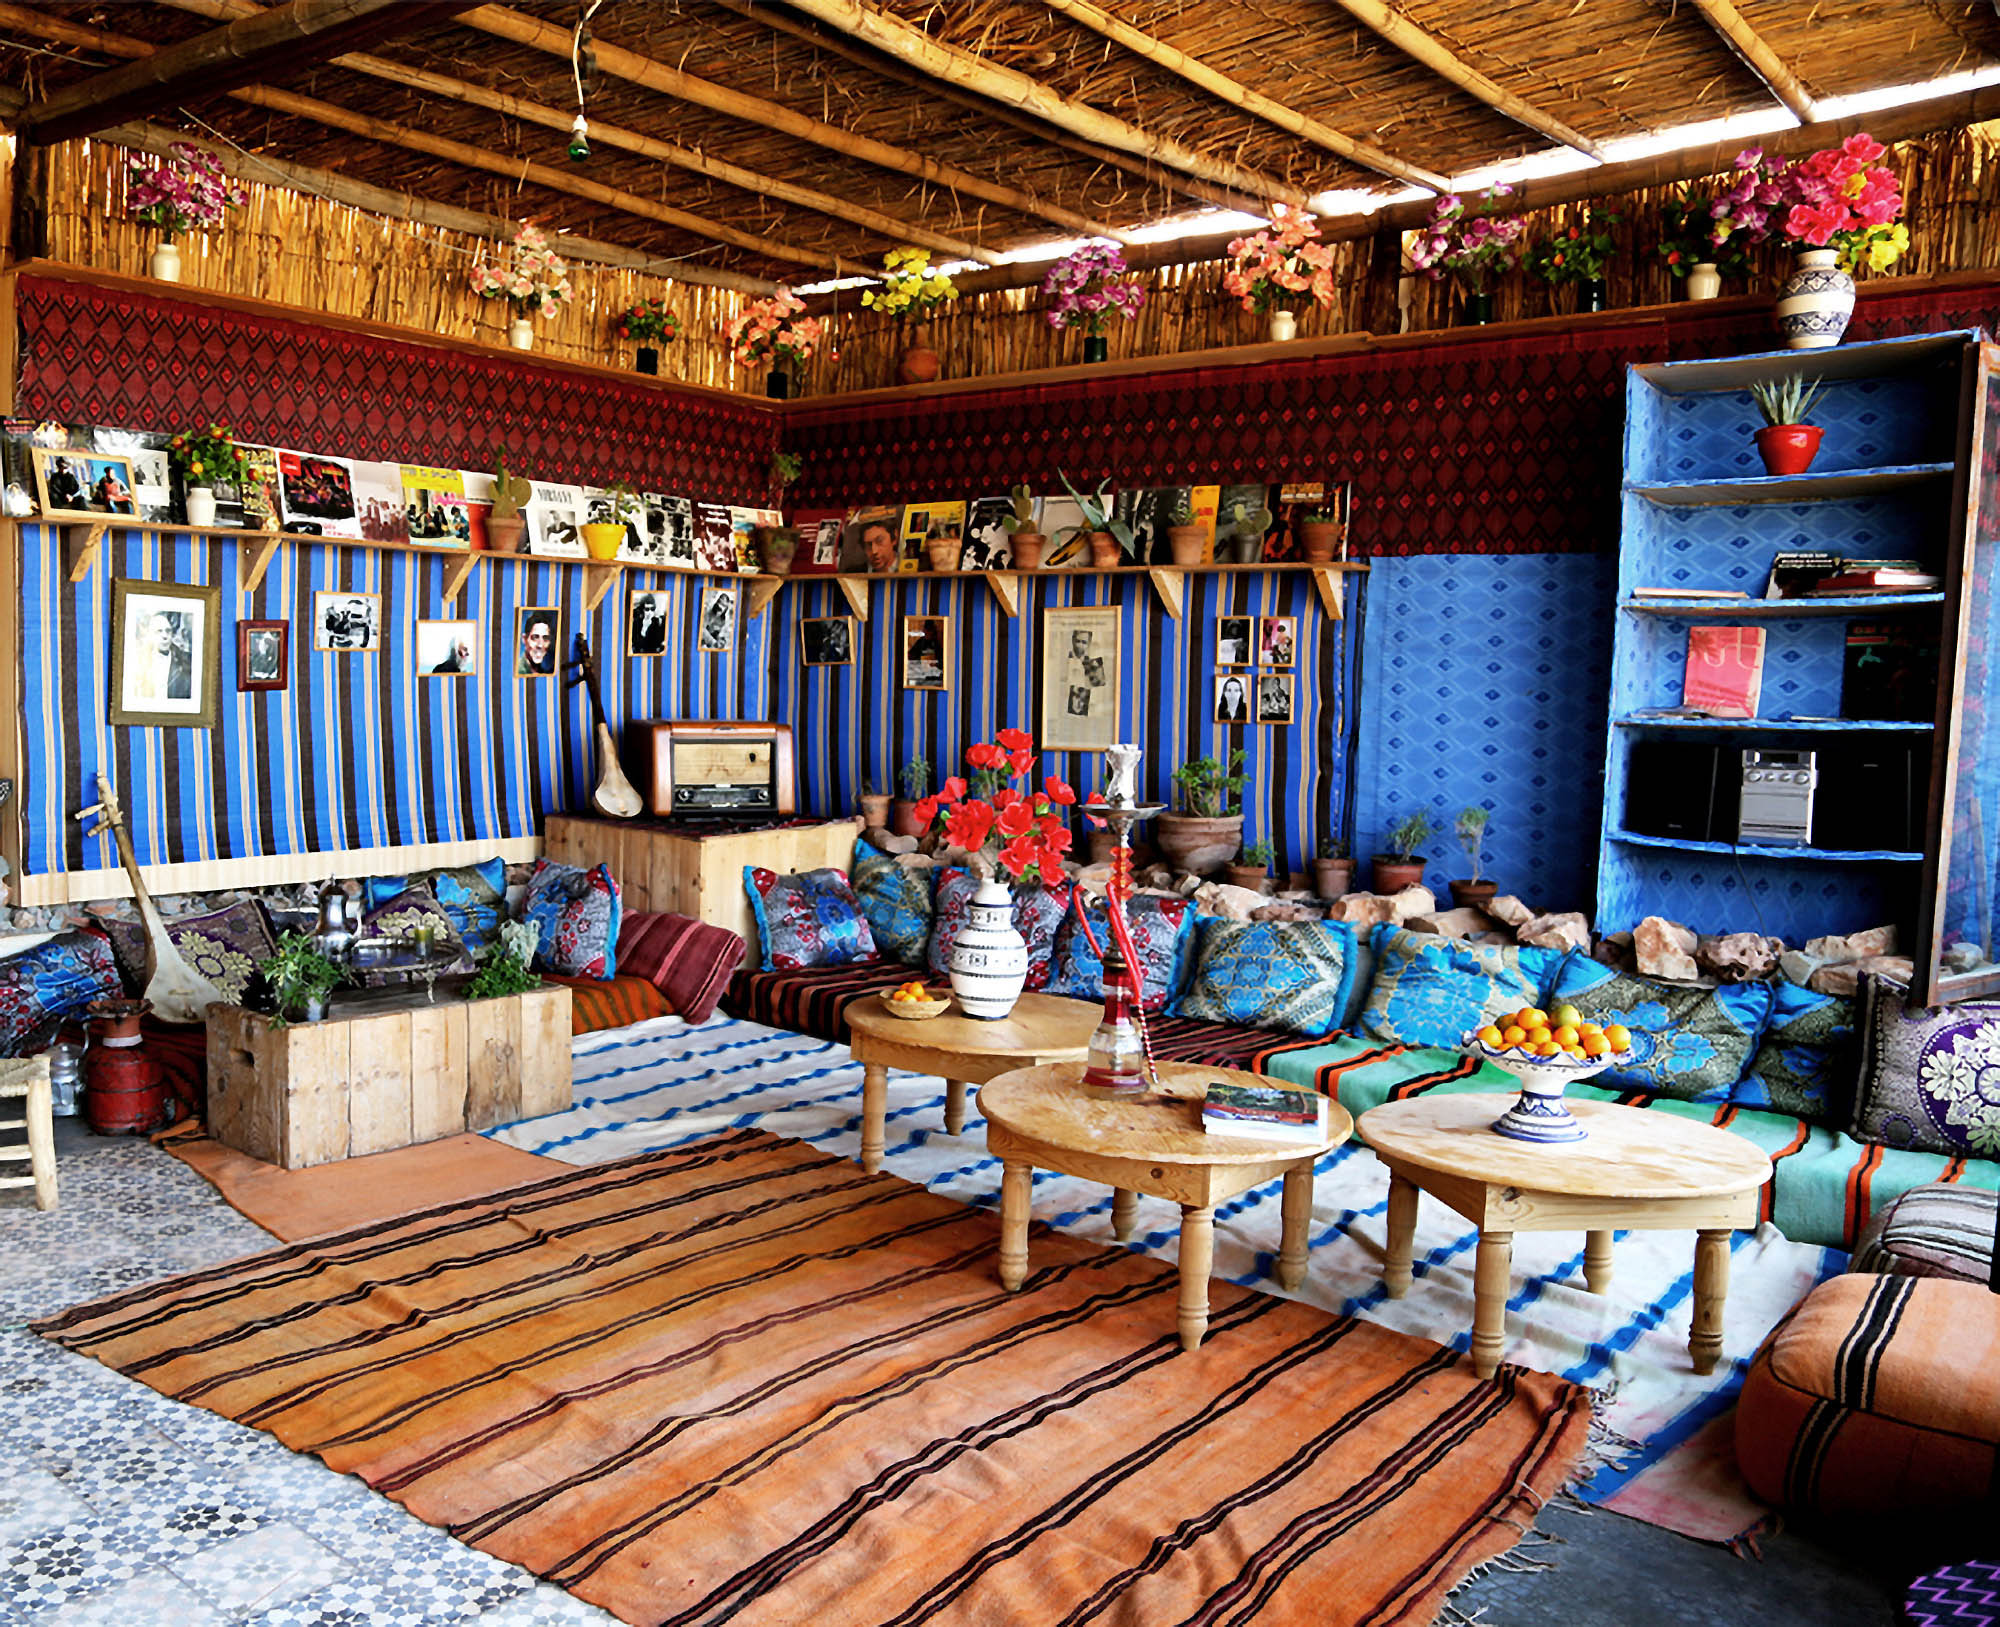 Colourful Moroccan interior with floor cushions and patterned rugs